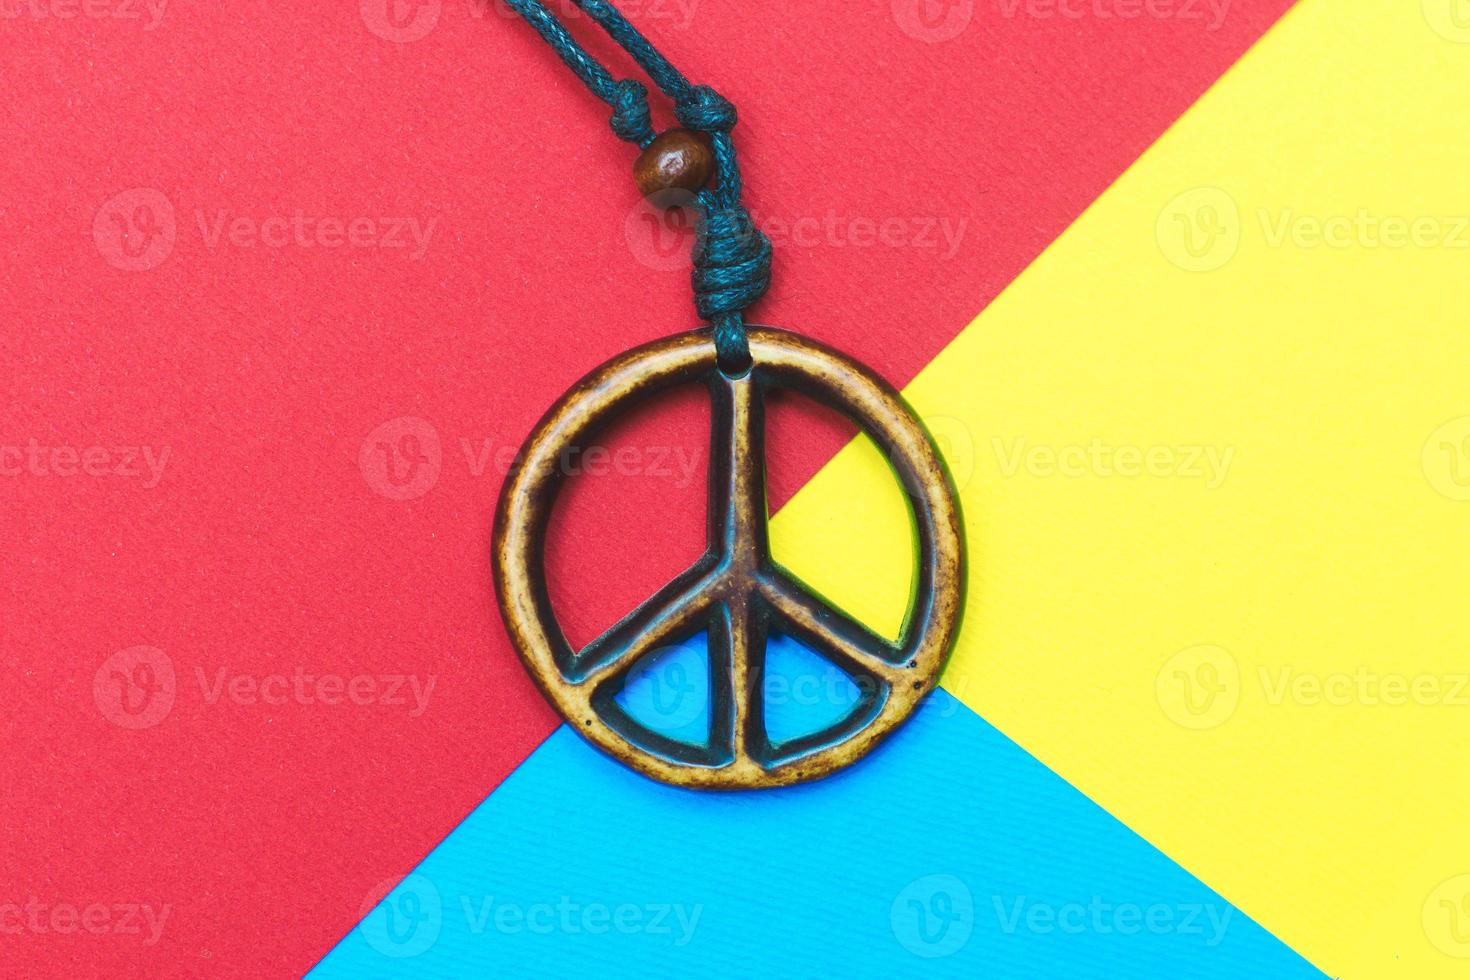 The wooden peace symbol photo